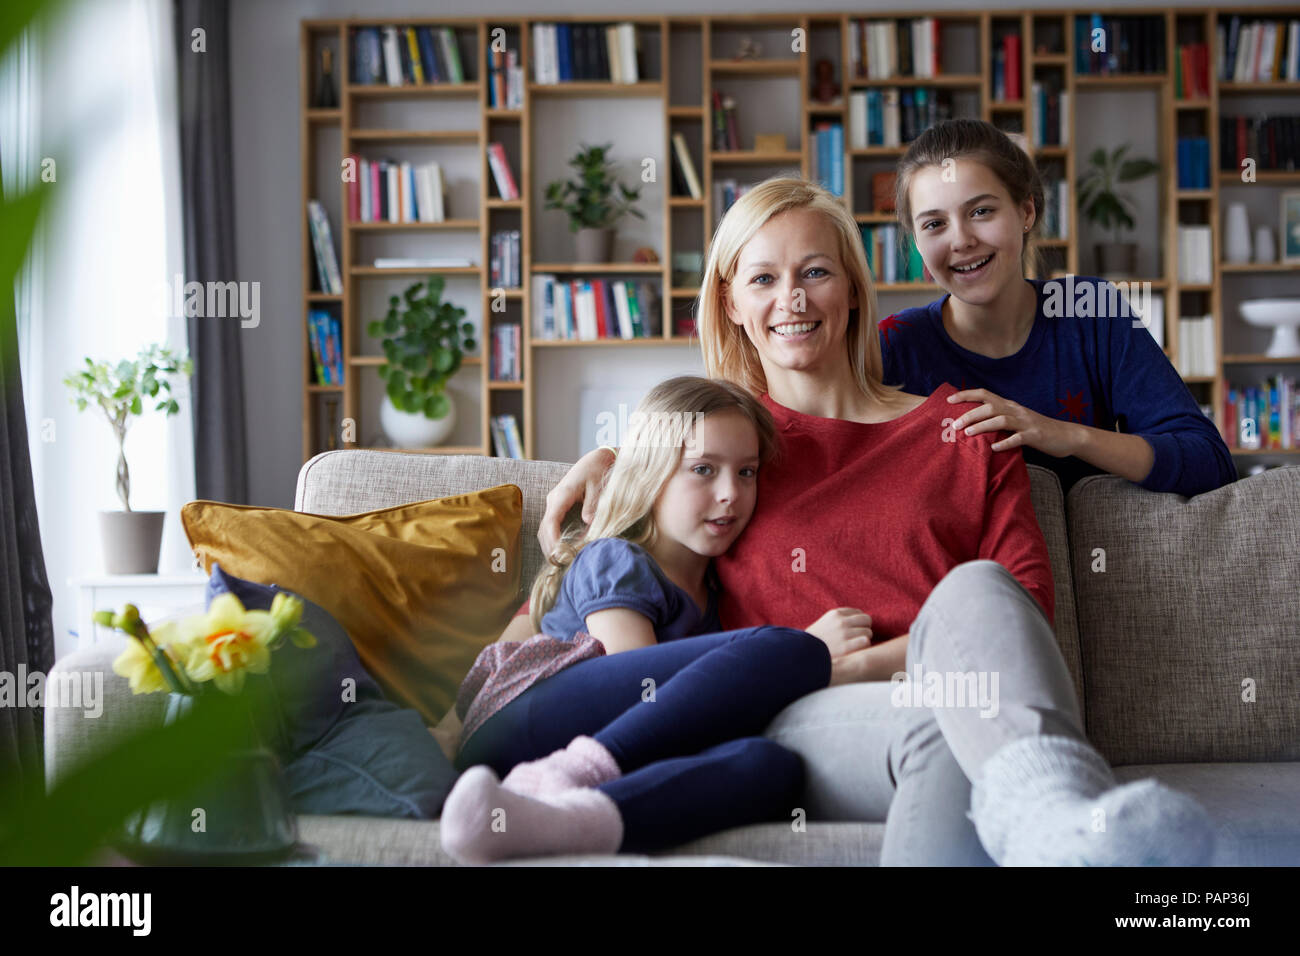 Mother and her daughters cuddling and having fun, sitting on couch Stock Photo